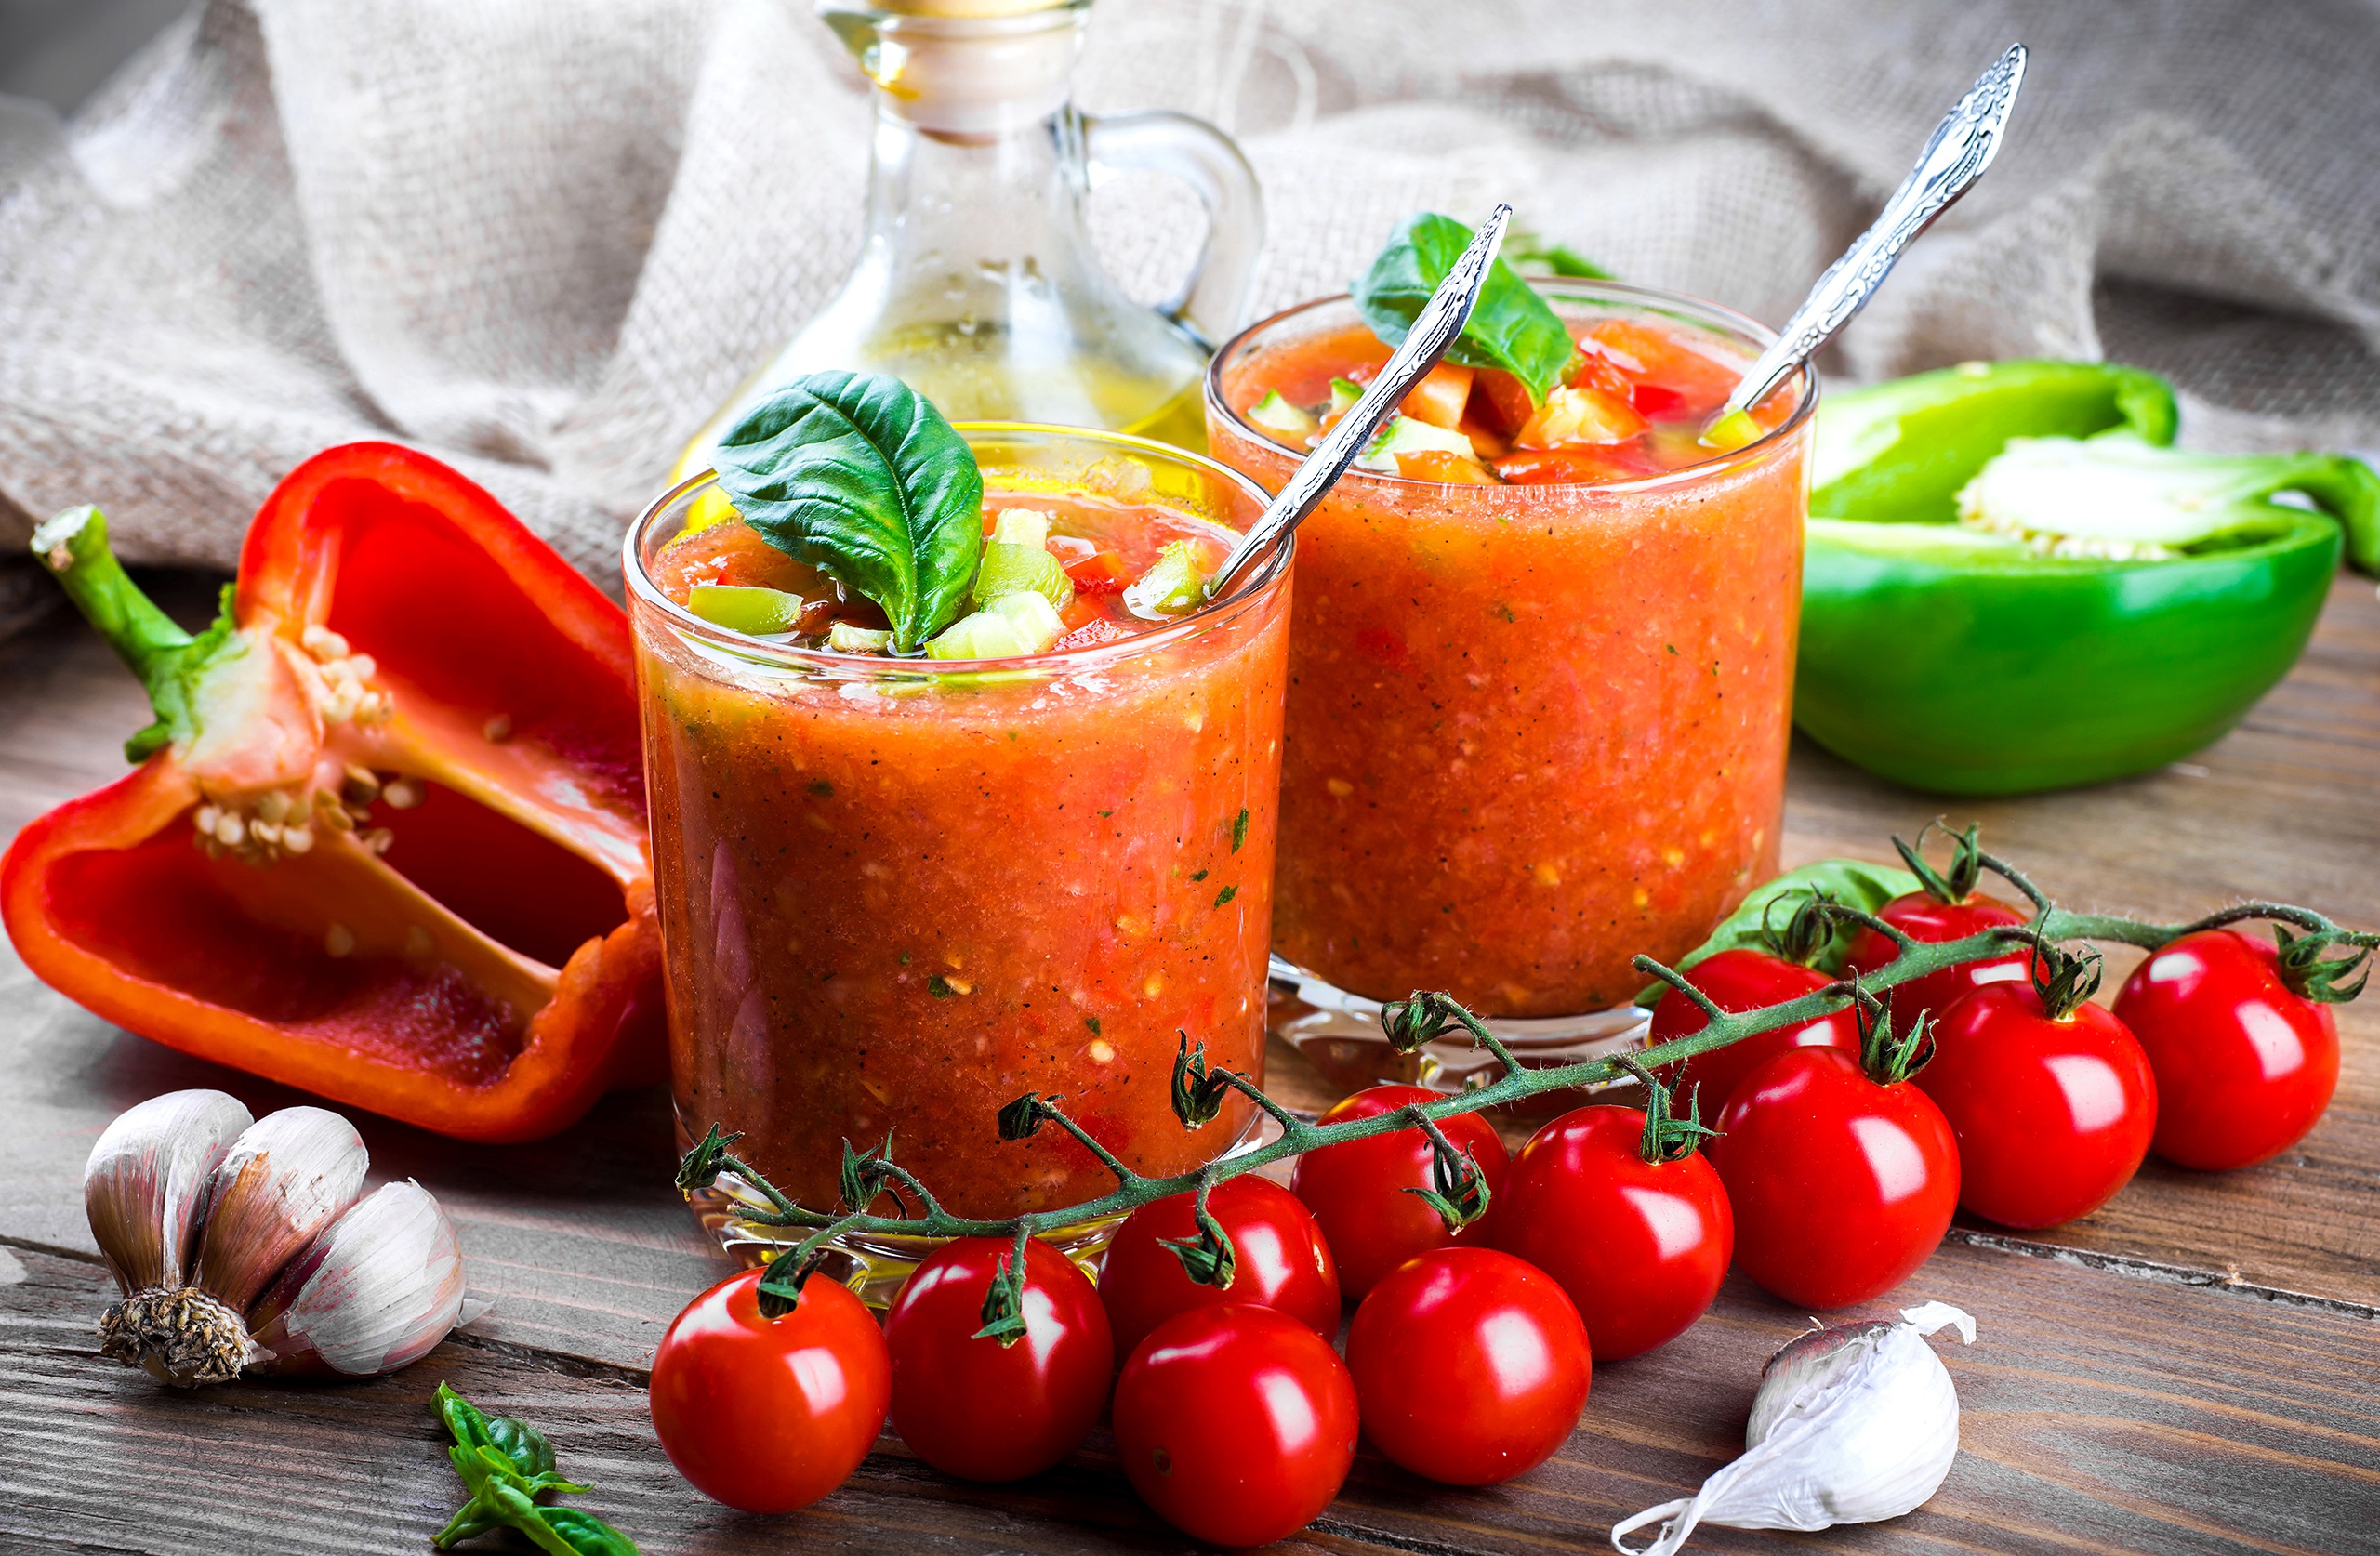 Vegetables Food Garlic Tomatoes Bell Peppers Soup Basil Olive Oil Wooden Surface Gazpacho 2560x1674